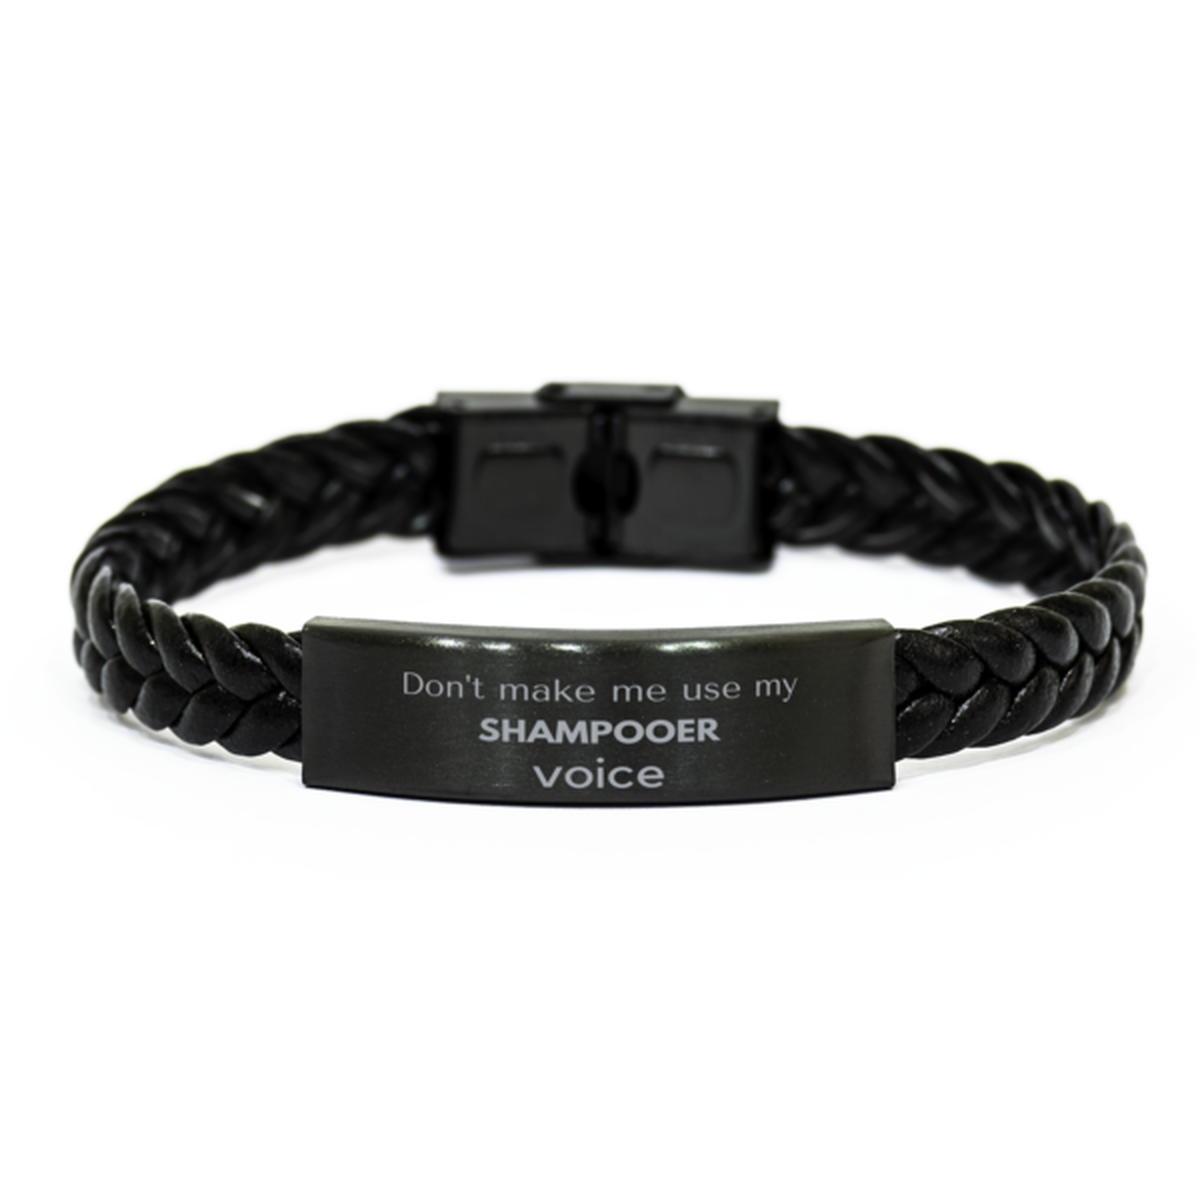 Don't make me use my Shampooer voice, Sarcasm Shampooer Gifts, Christmas Shampooer Braided Leather Bracelet Birthday Unique Gifts For Shampooer Coworkers, Men, Women, Colleague, Friends